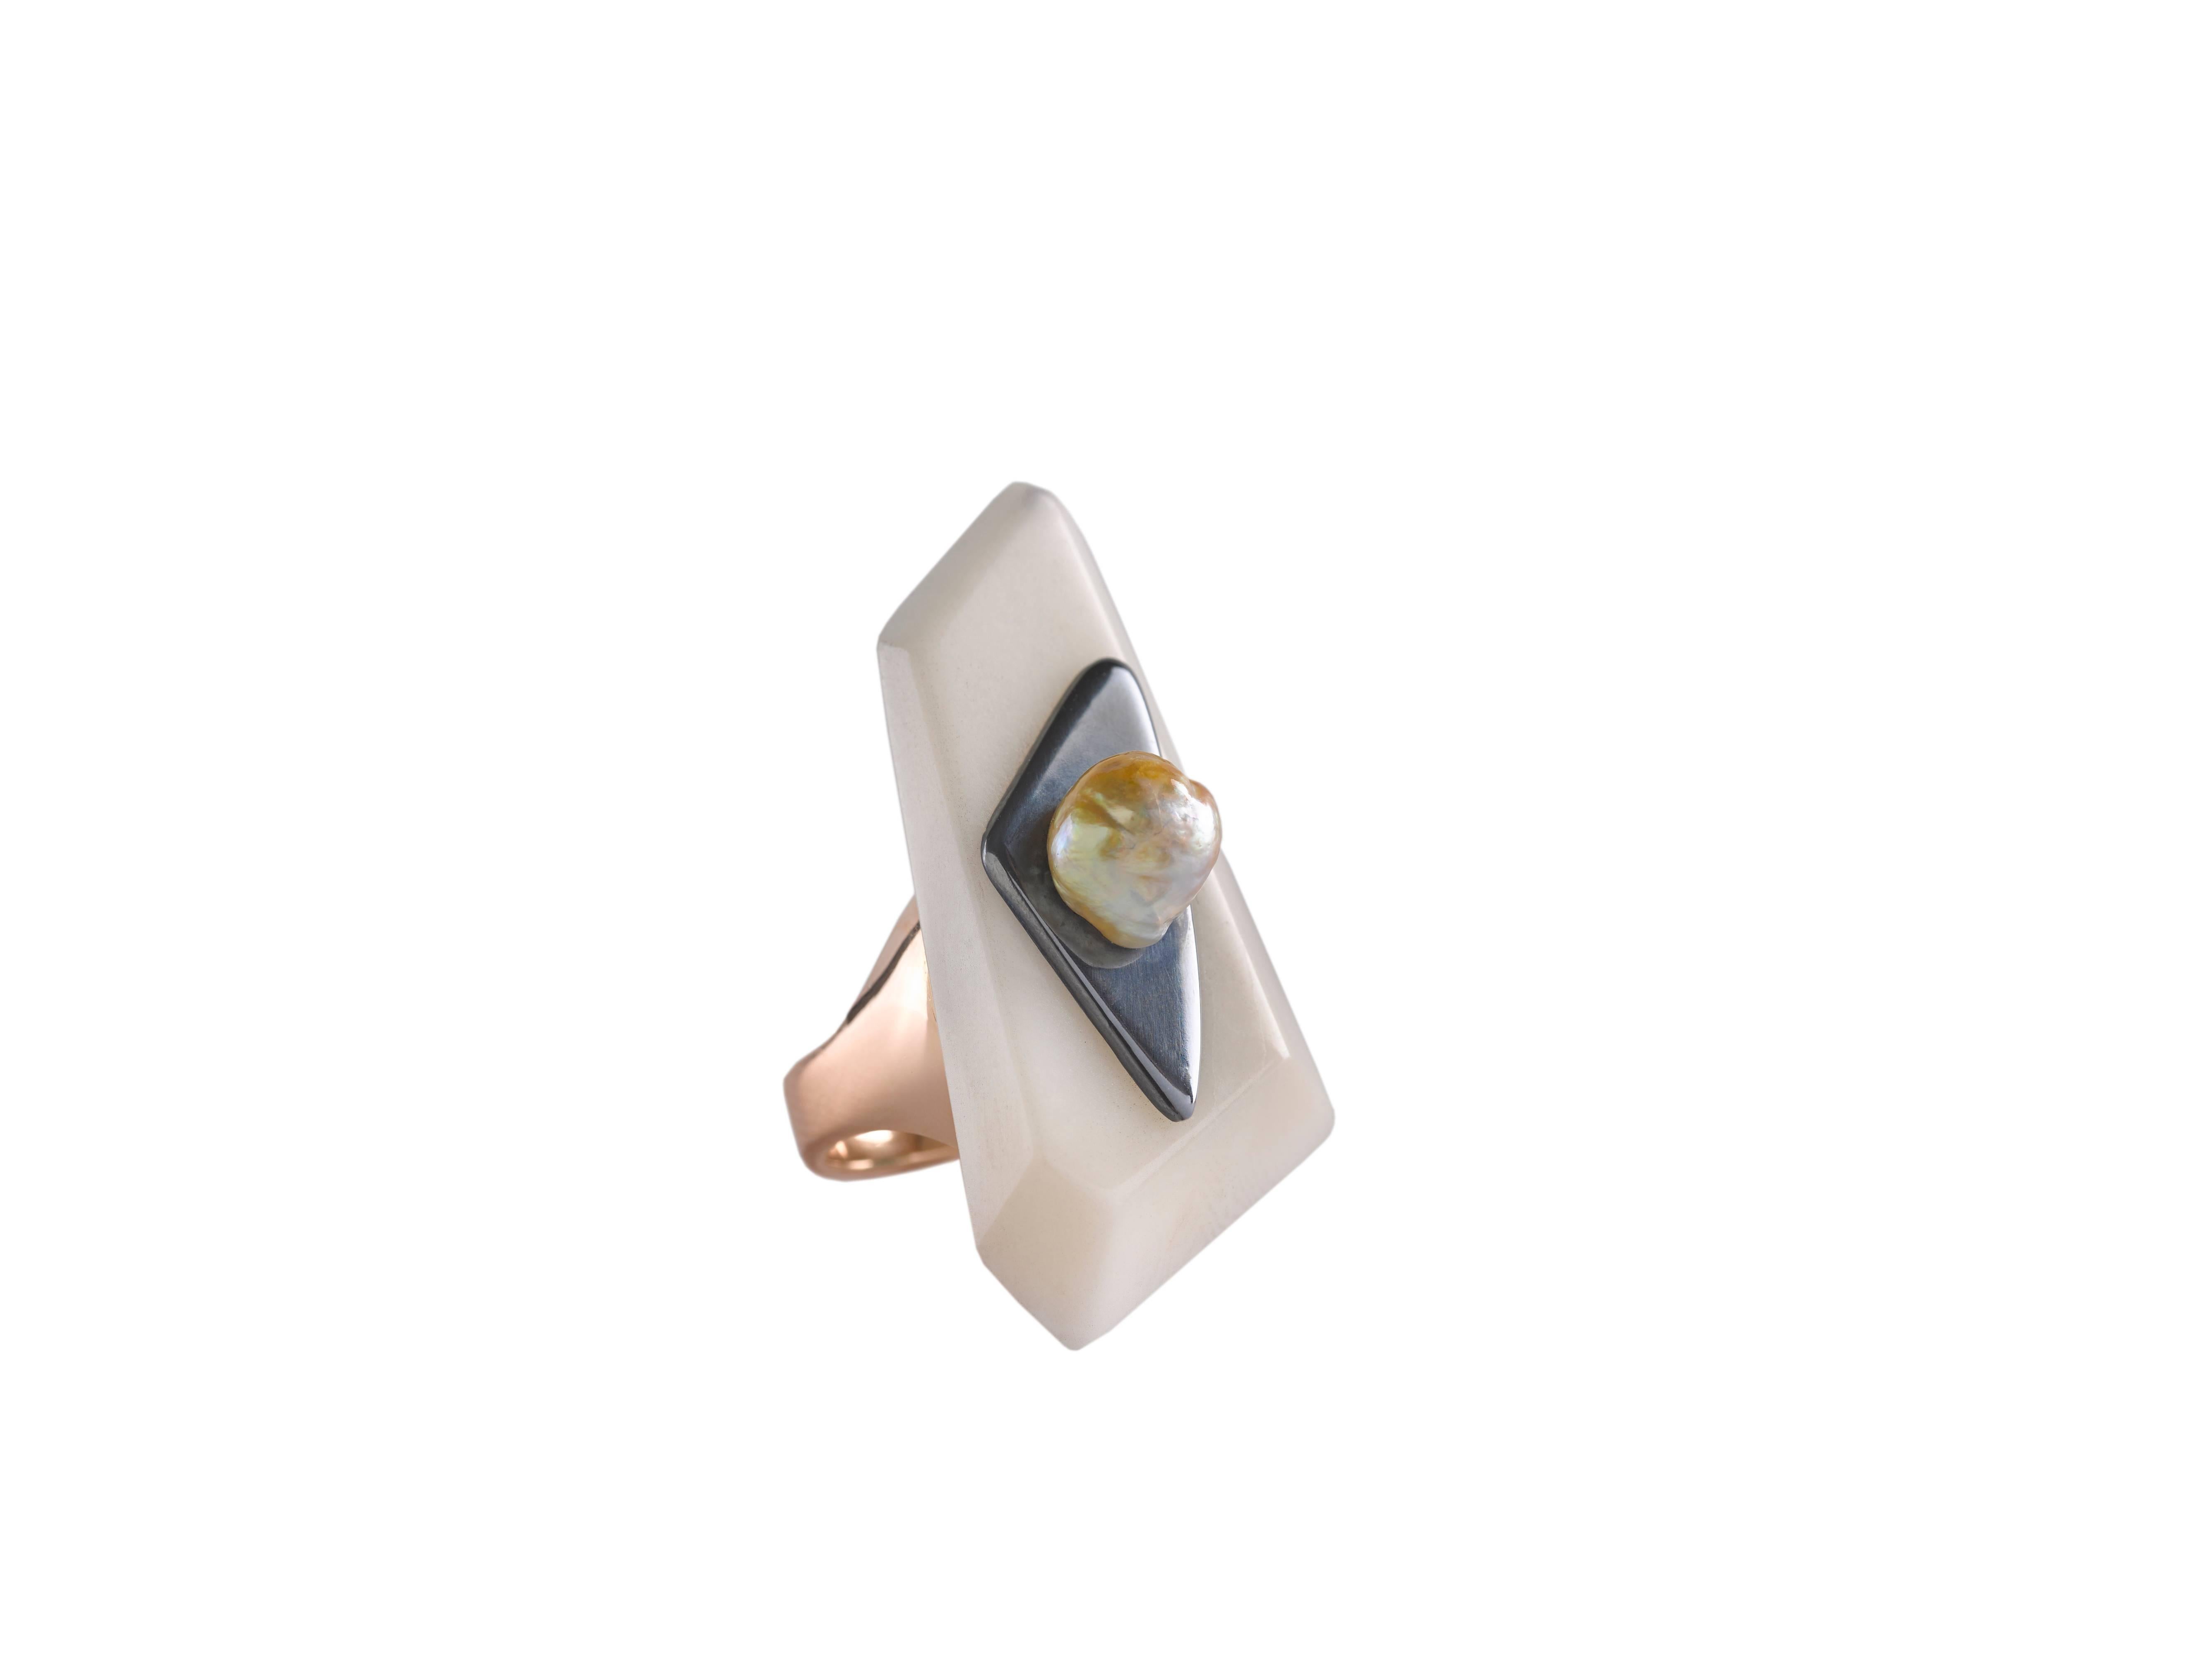 This regal MATAR hand-carved sculptural ring celebrates the beauty of Bahrain’s rich pearl industry with a large genuine Bahraini high luster baroque pearl centered on a contrasting black polished shakudo overlay with traditional niage patina. 
The